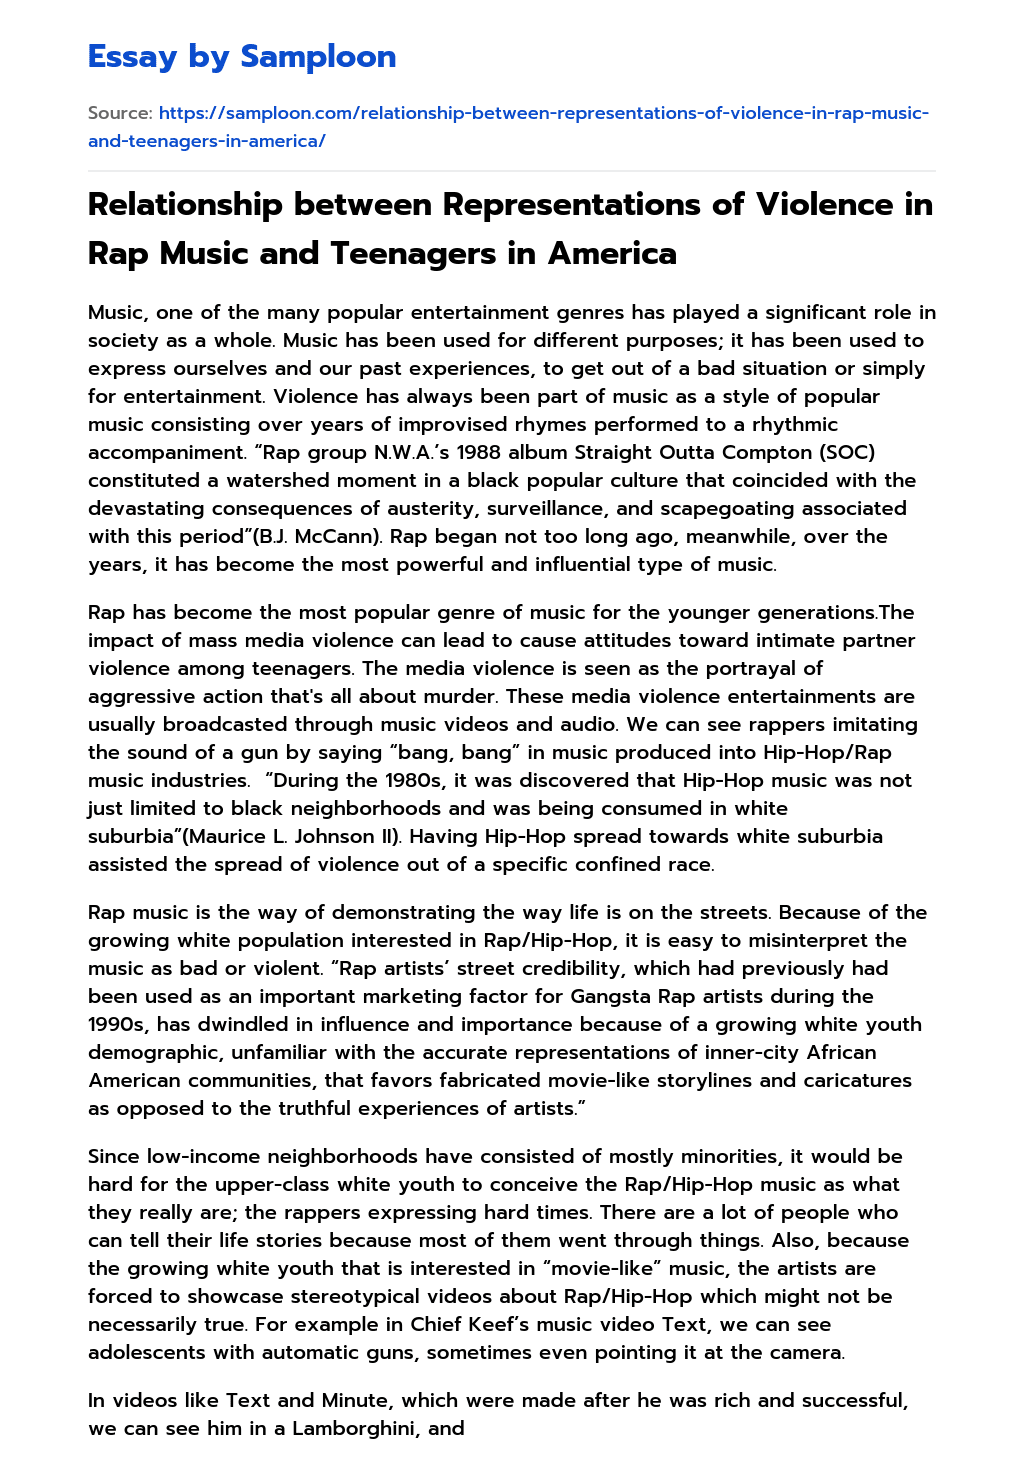 Relationship between Representations of Violence in Rap Music and Teenagers in America essay